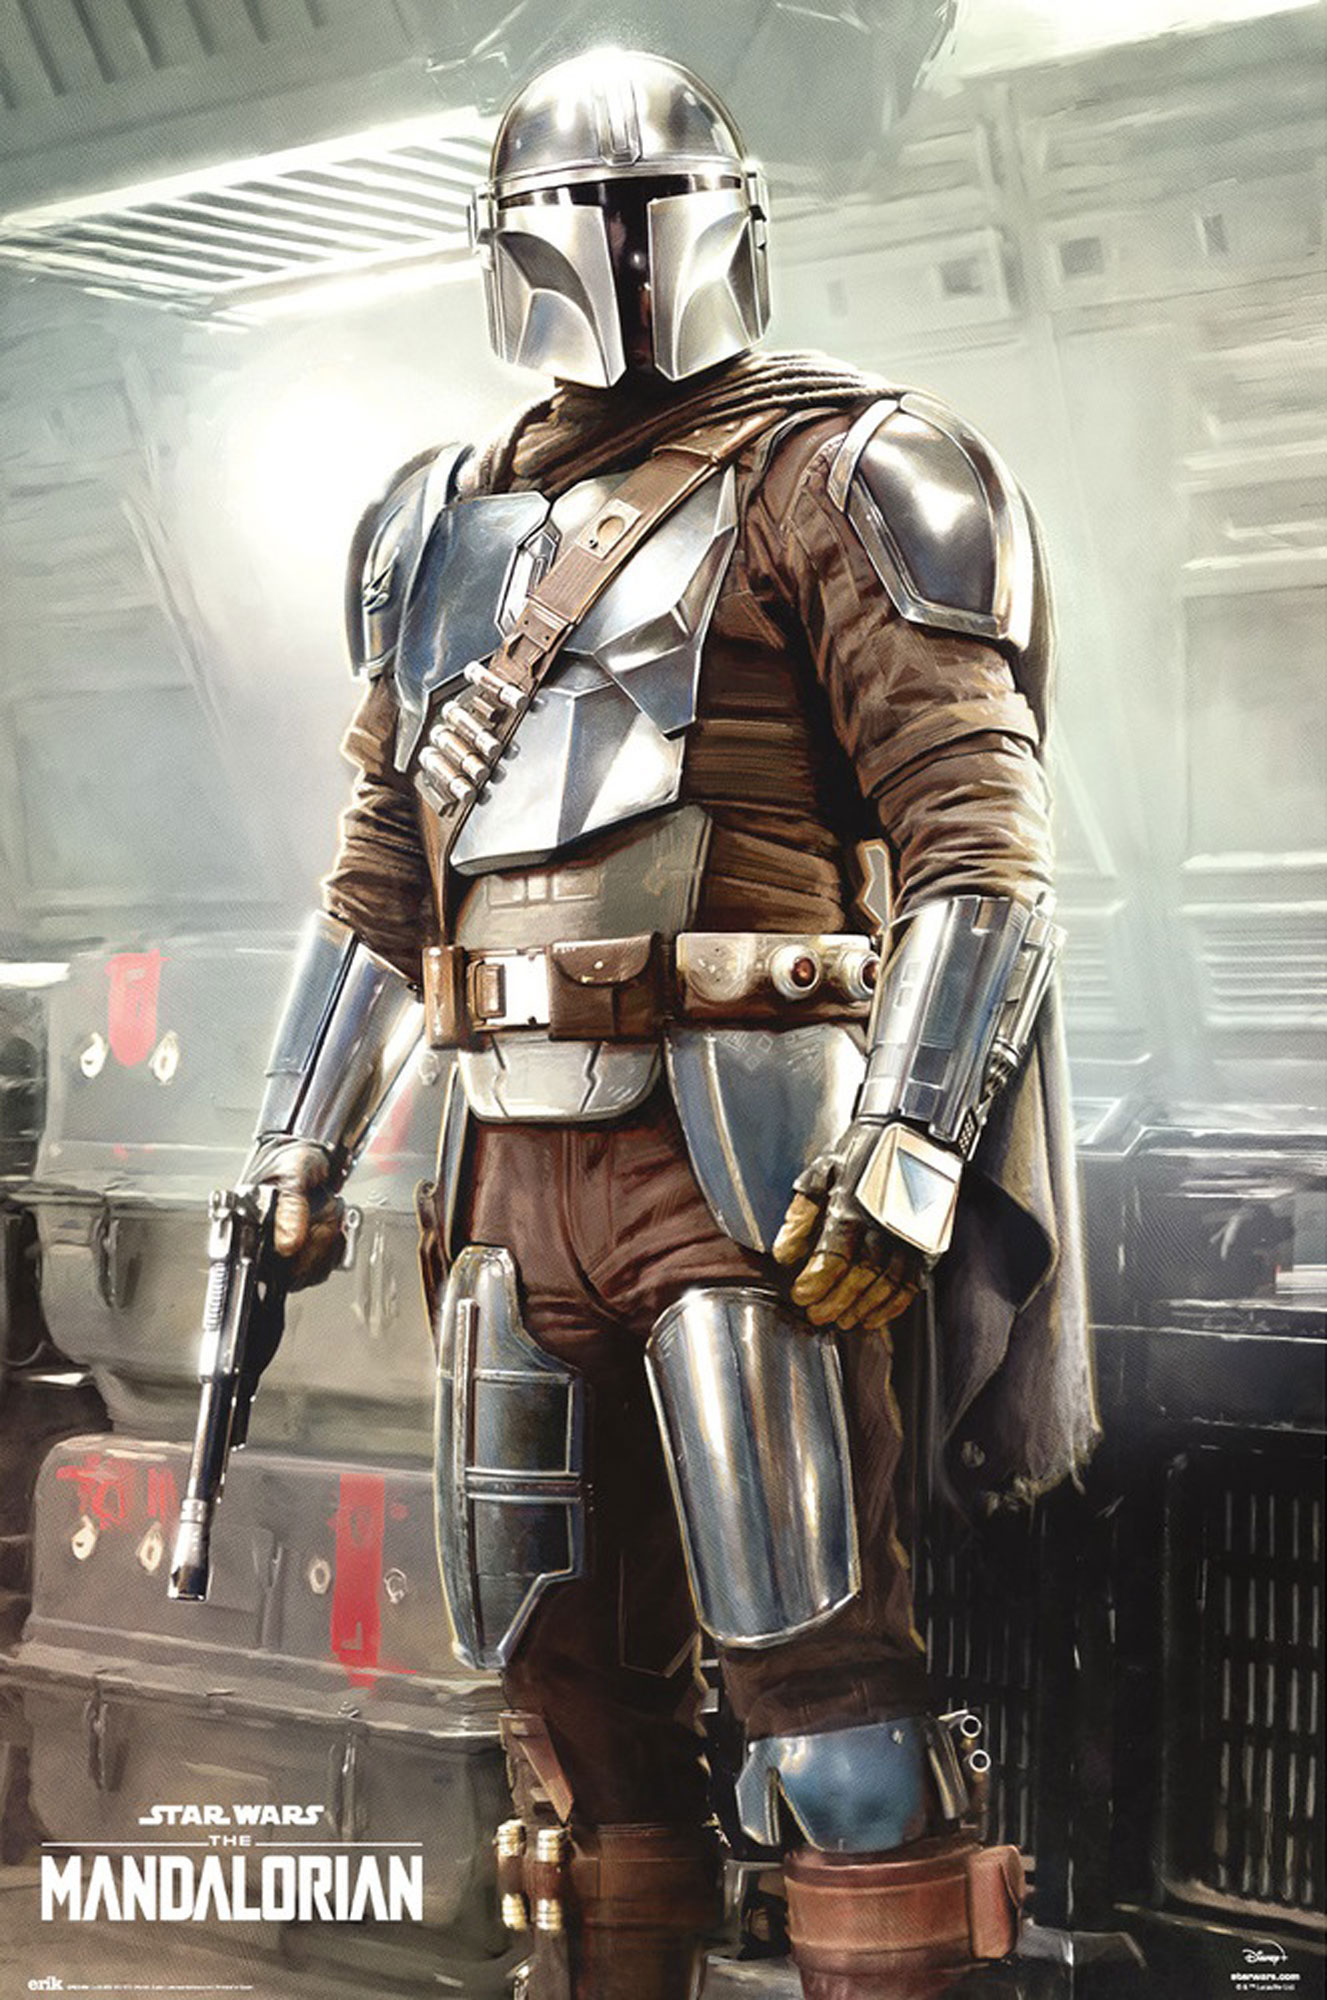 Wars Way the - This The - Star is Mandalorian